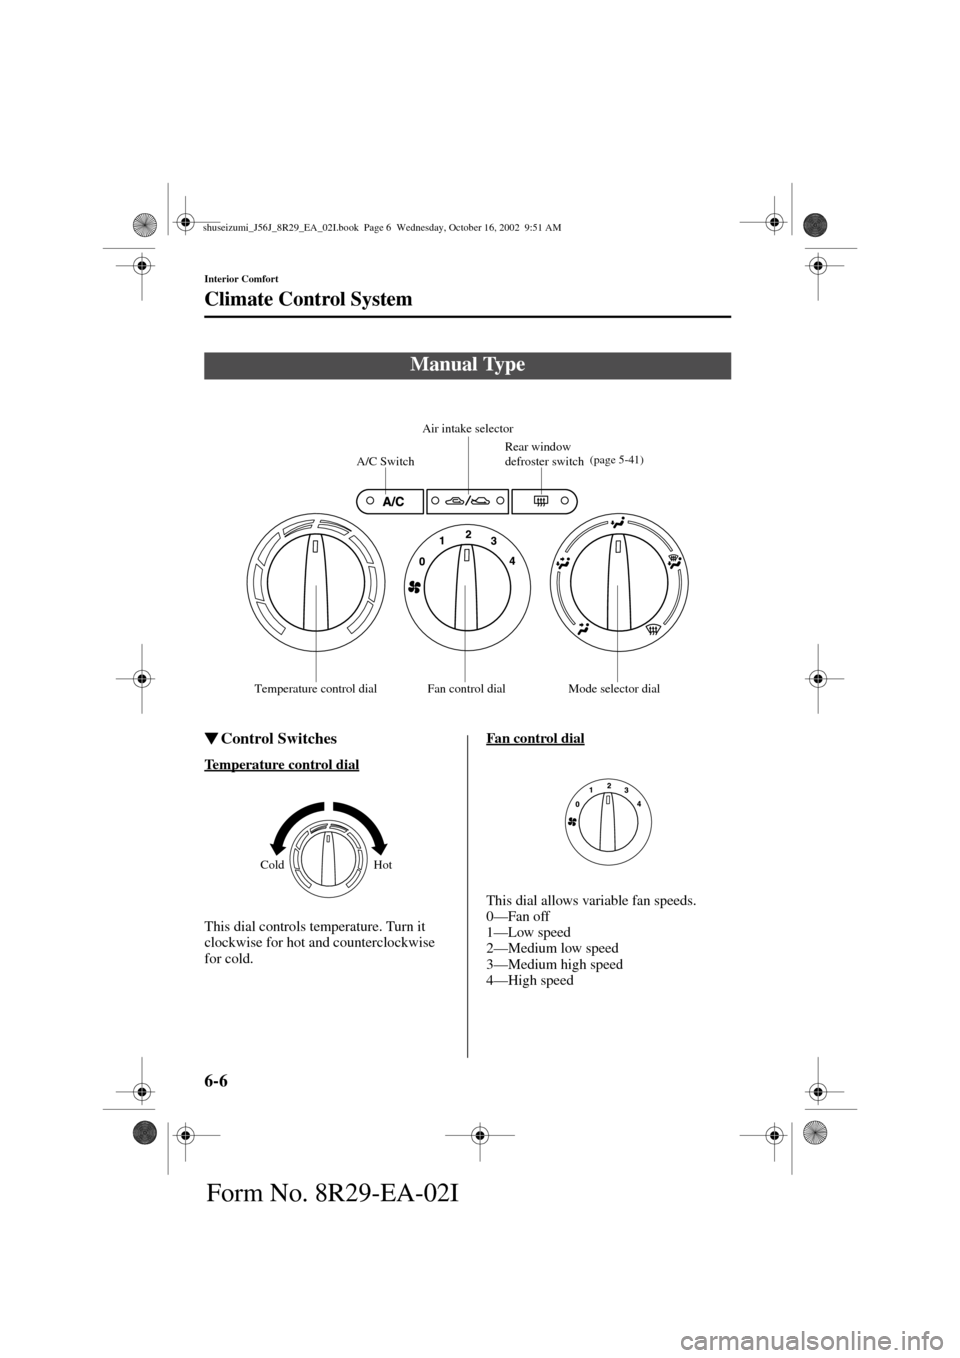 MAZDA MODEL 6 2003  Owners Manual (in English) 6-6
Interior Comfort
Climate Control System
Form No. 8R29-EA-02I
Control Switches
Temperature control dial
This dial controls temperature. Turn it 
clockwise for hot and counterclockwise 
for cold.Fa